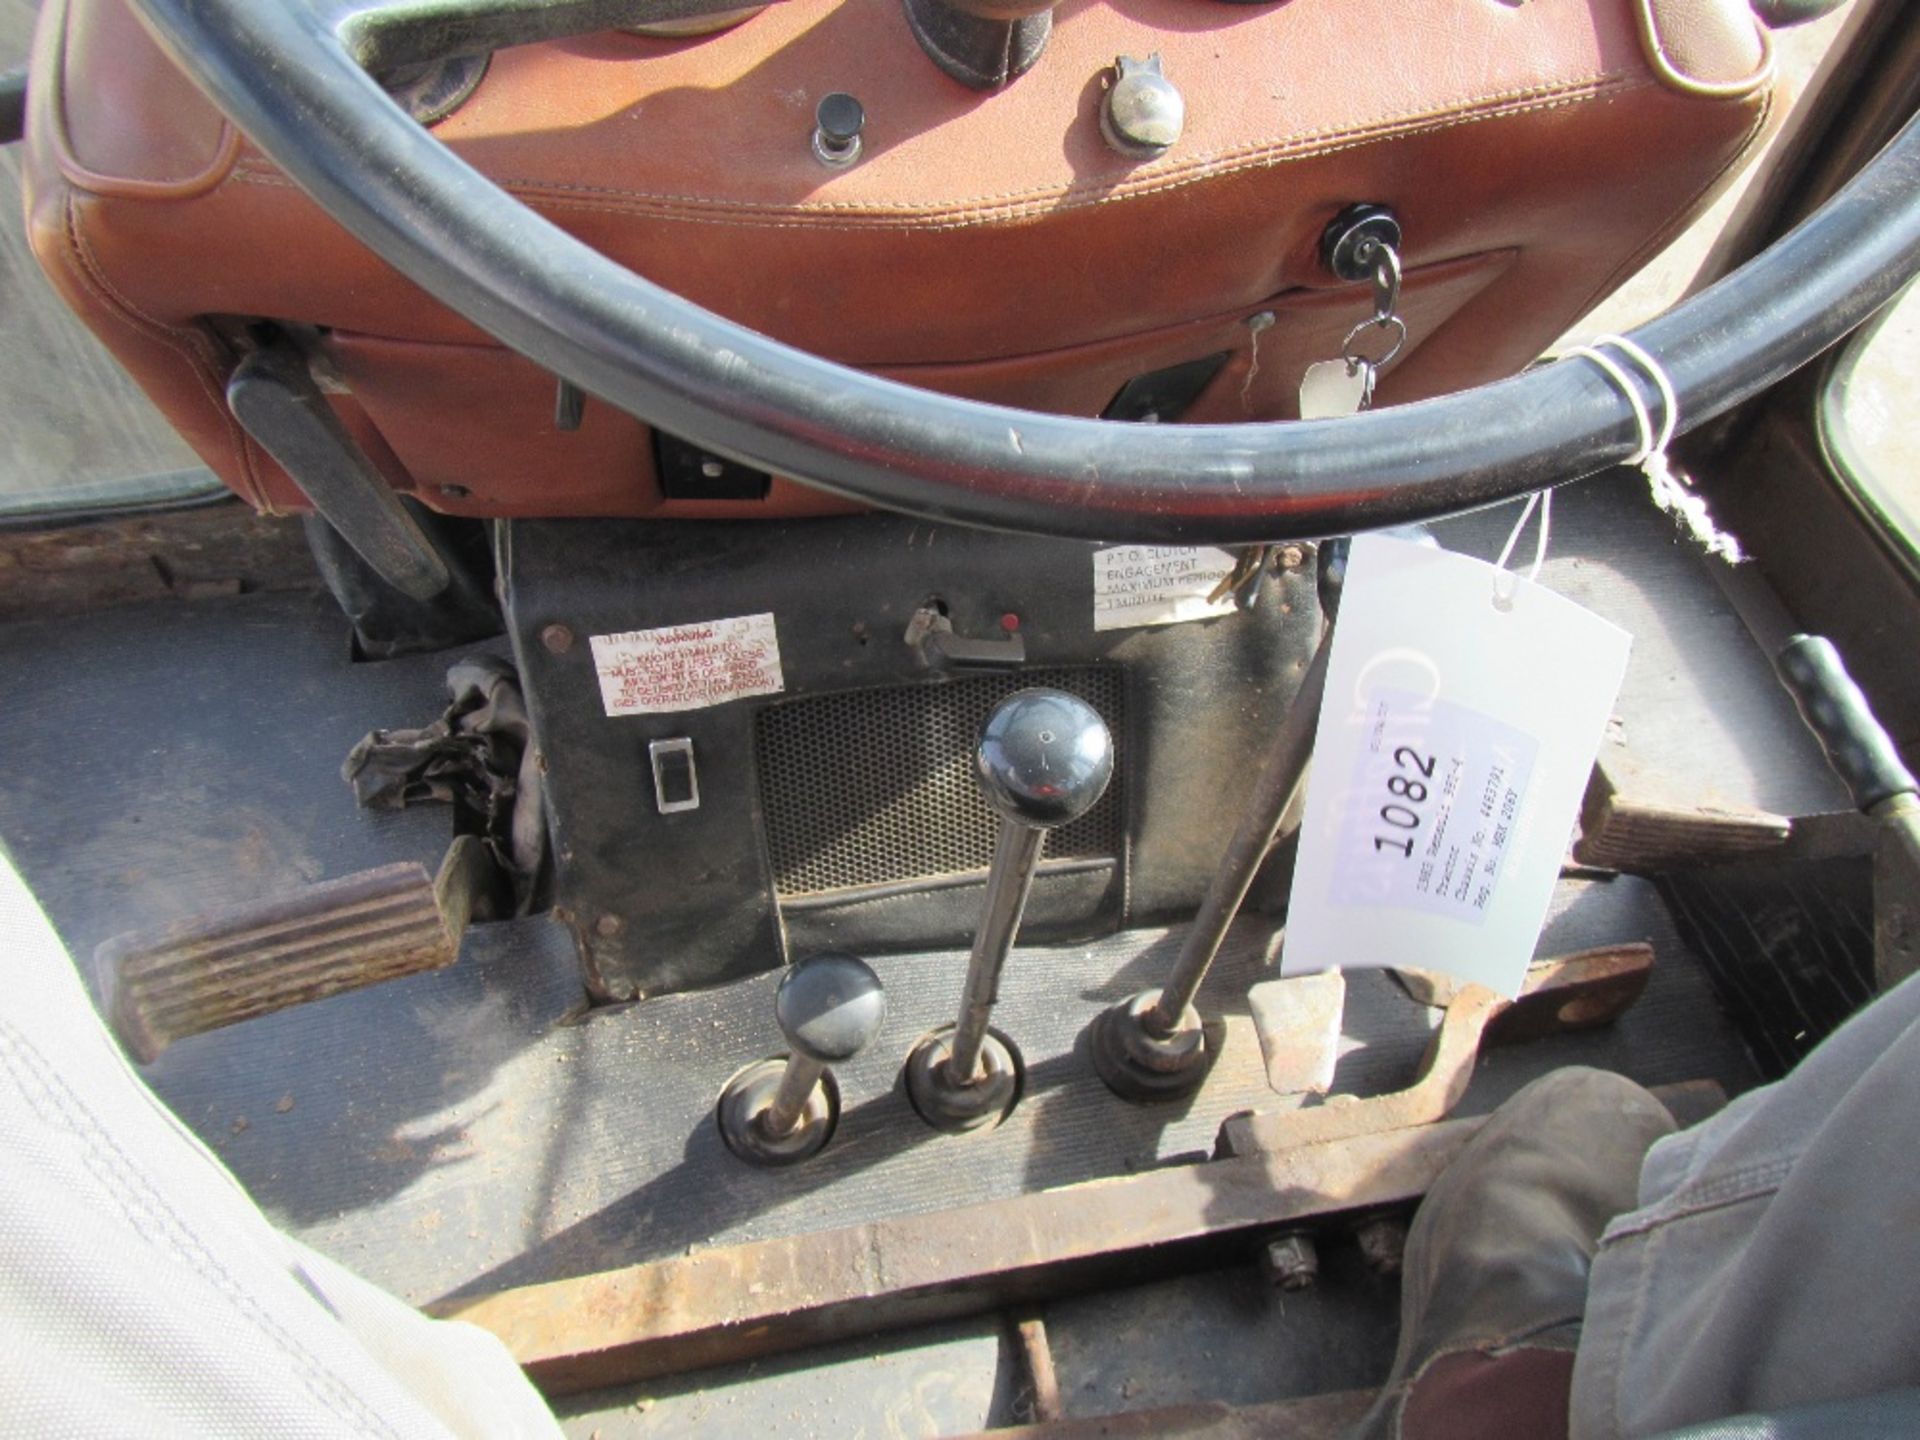 1983 Renault 981-4 Tractor. Reg Docs will be supplied. Reg. No. MBX 206Y Chassis No. 4483791 - Image 14 of 16